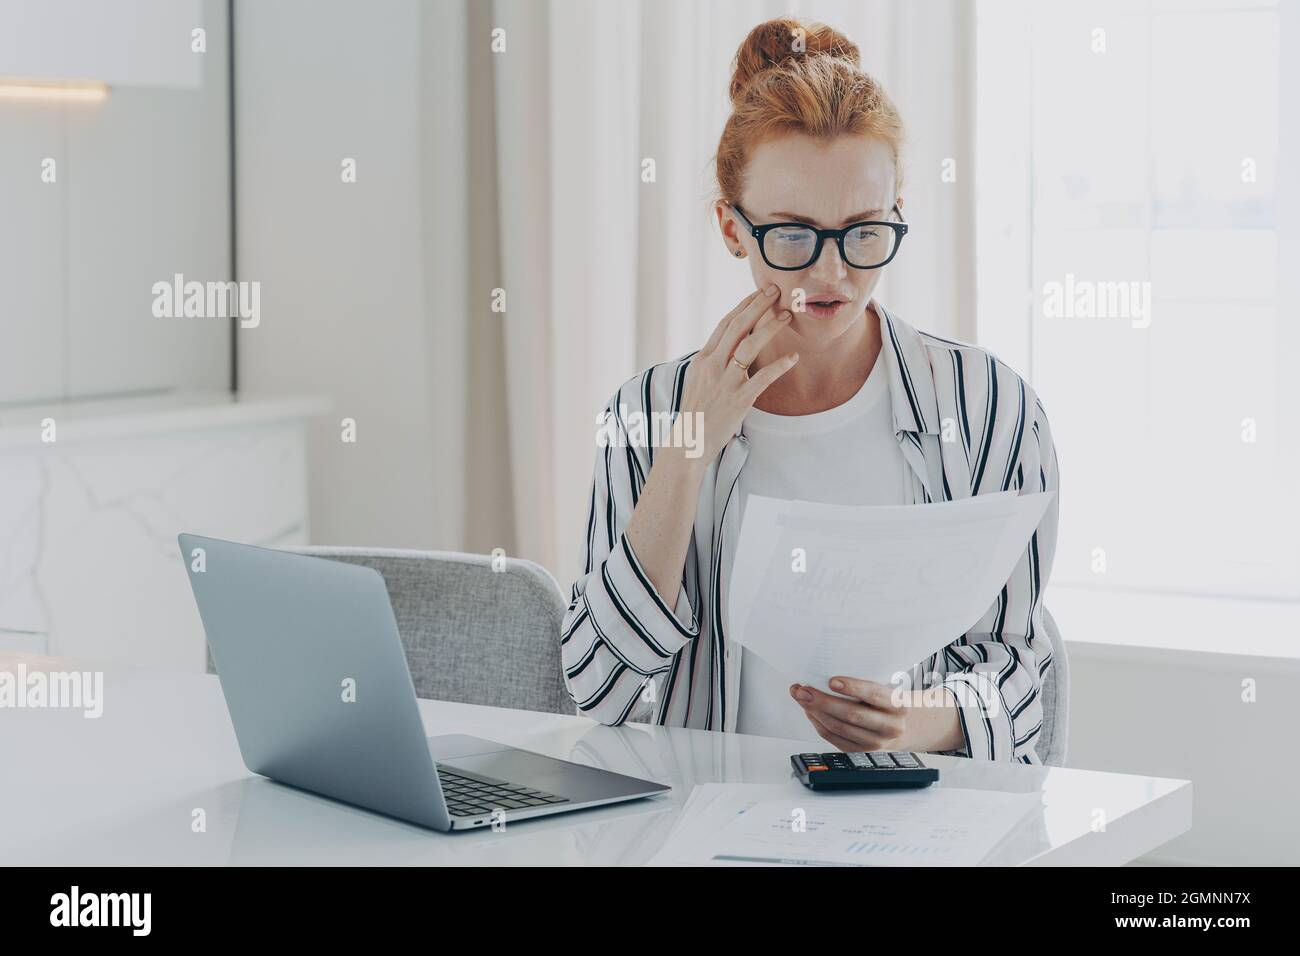 Young depressed woman with having financial problems, sitting at table with laptop and calculator Stock Photo